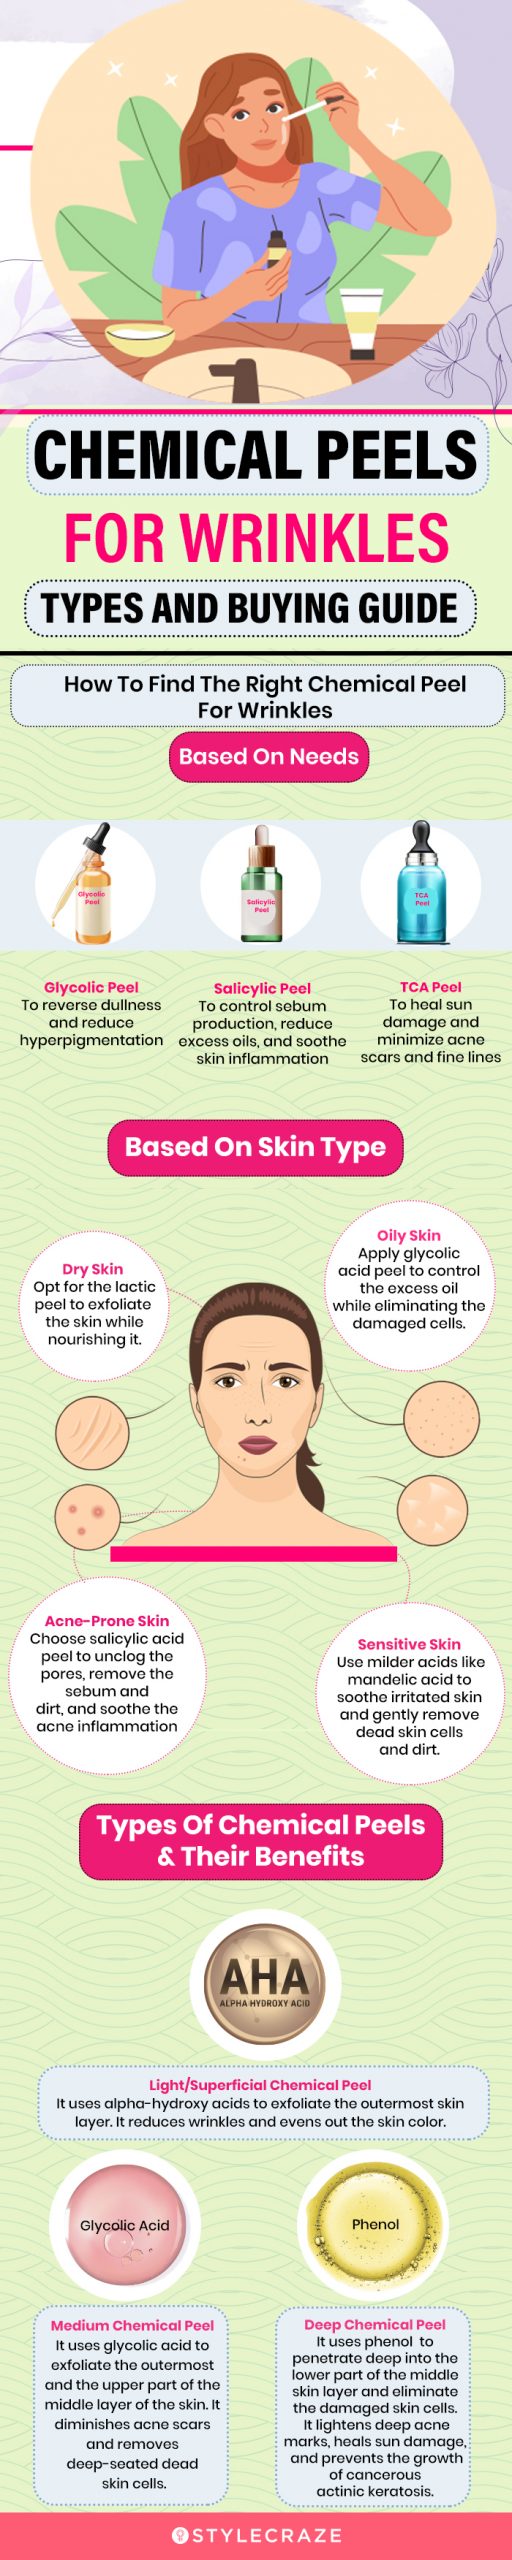 Chemical Peels For Wrinkles: Types And Buying Guide (infographic)